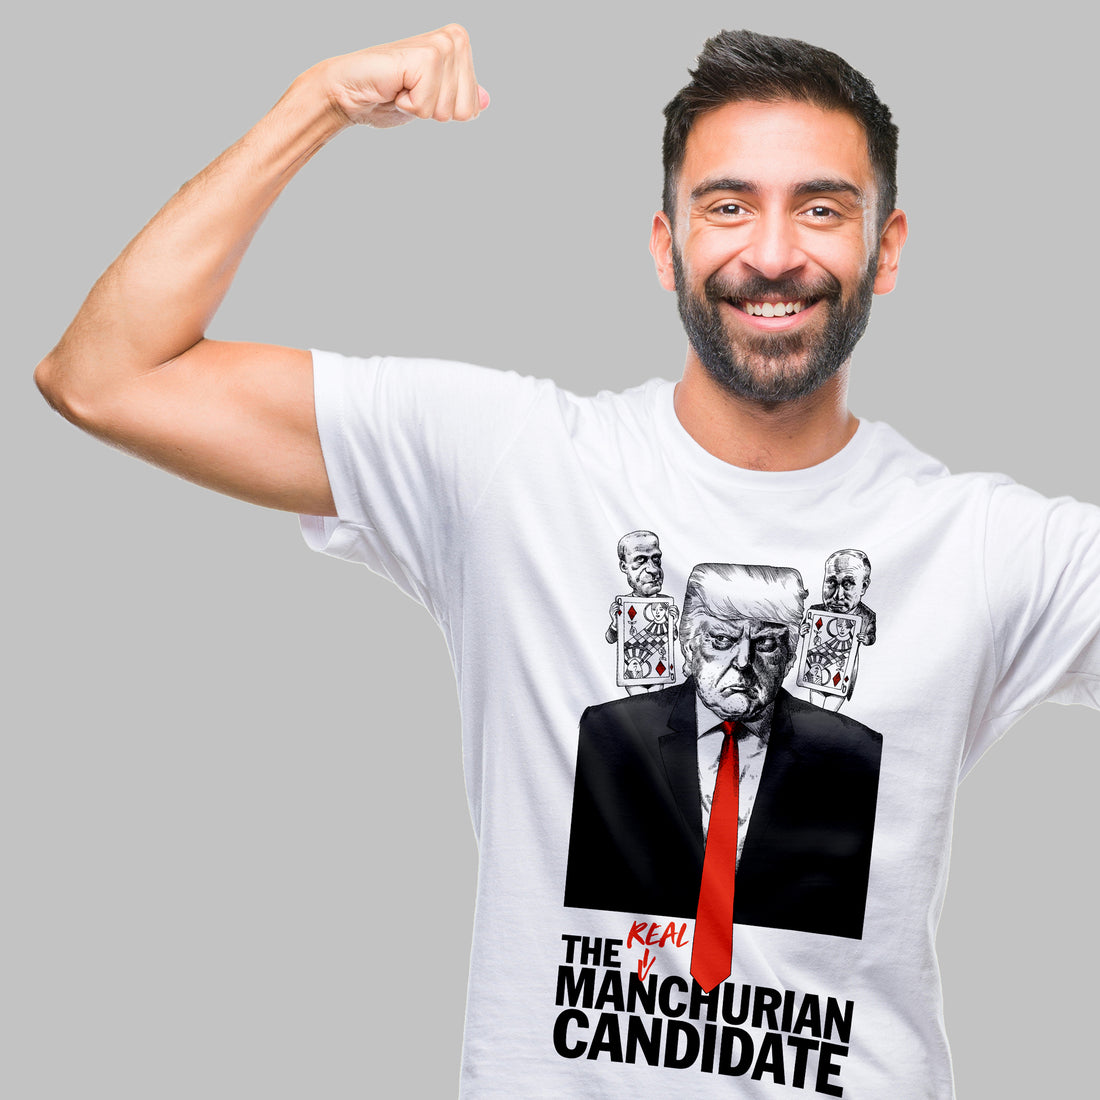 is the manchurian candidate a true story